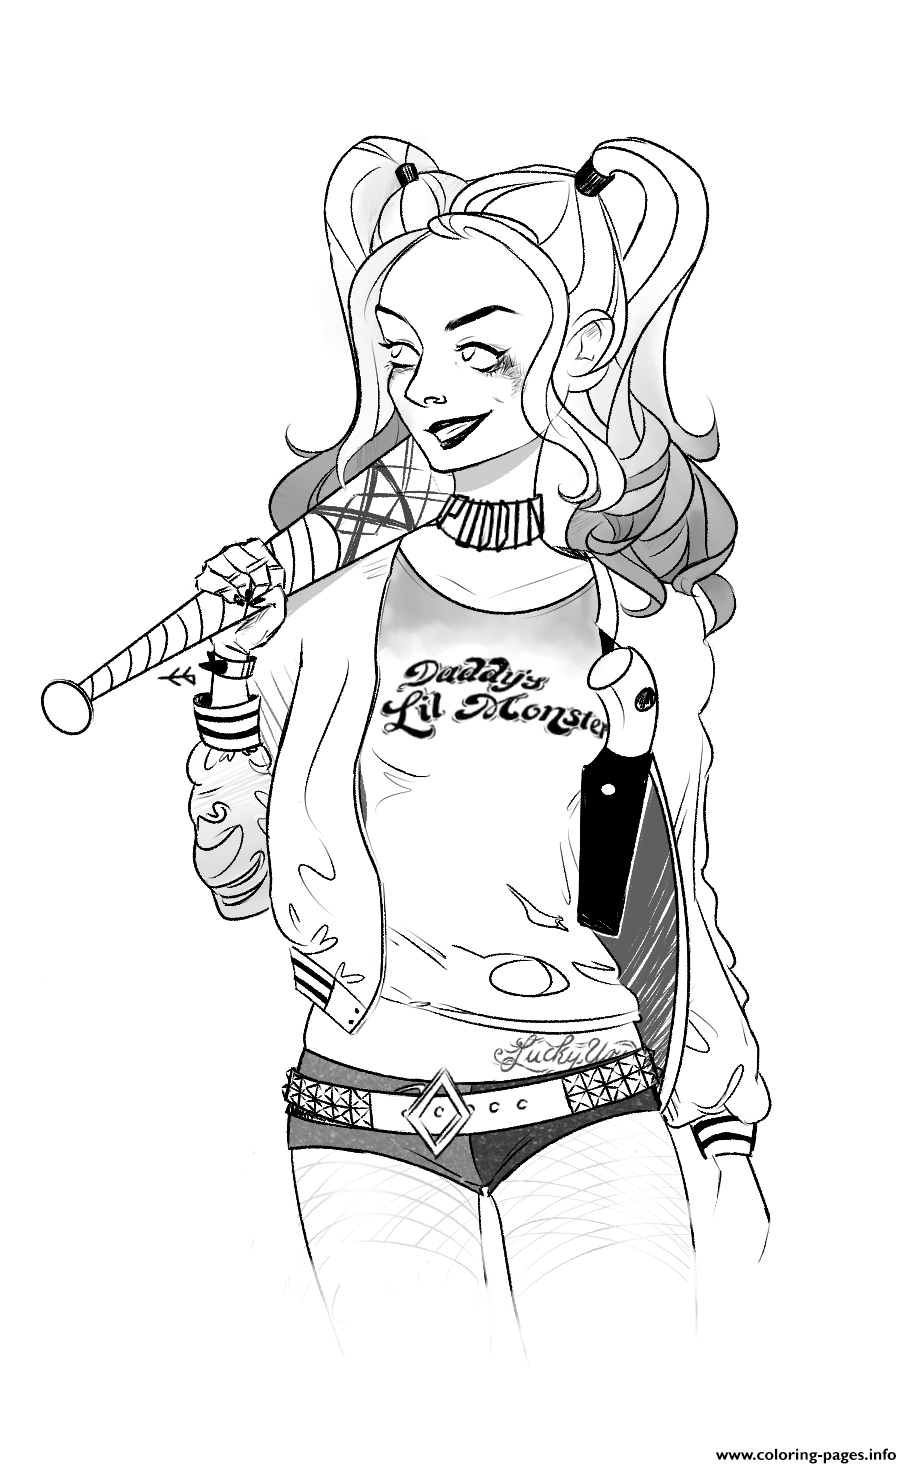 Harley Quinn Coloring Pages To Print Coloring Pages Harley Quinn Suicide Squad Coloring Pages Printable